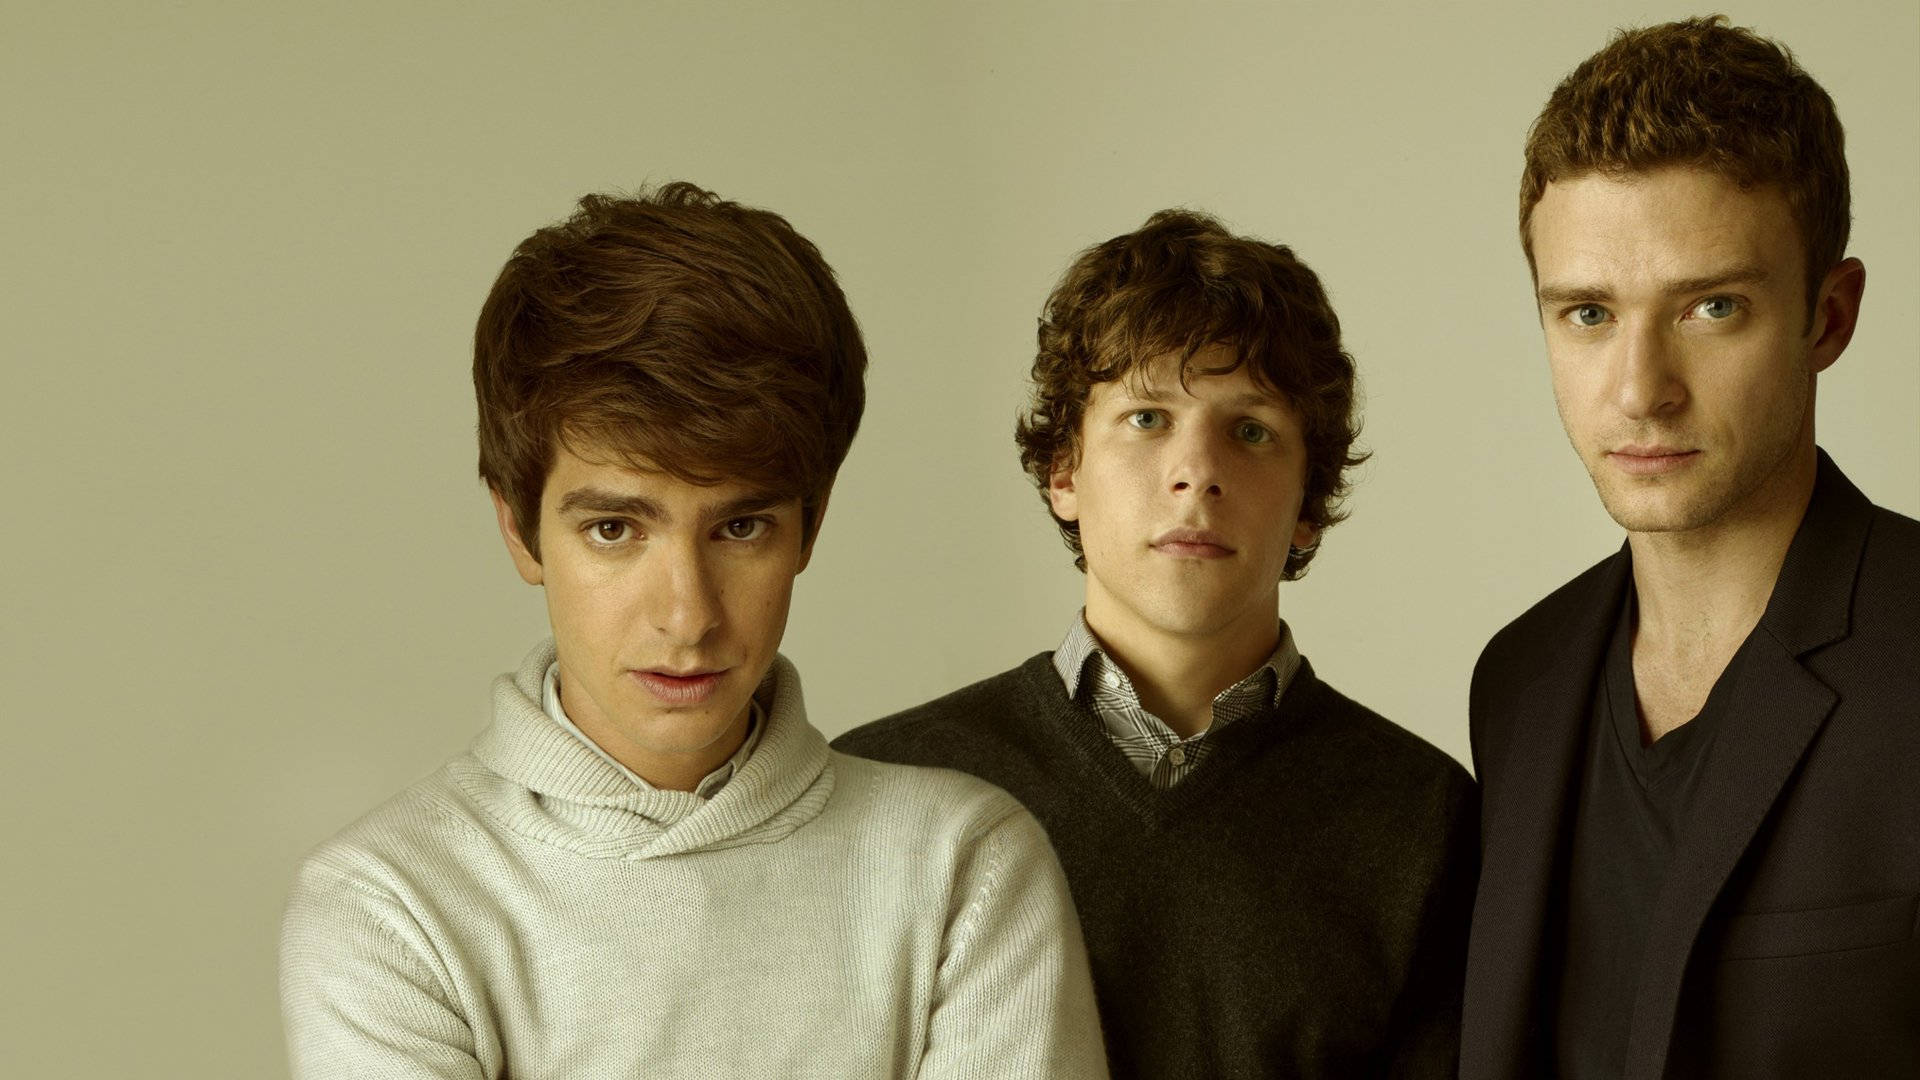 Three young men standing next to each other. - Andrew Garfield